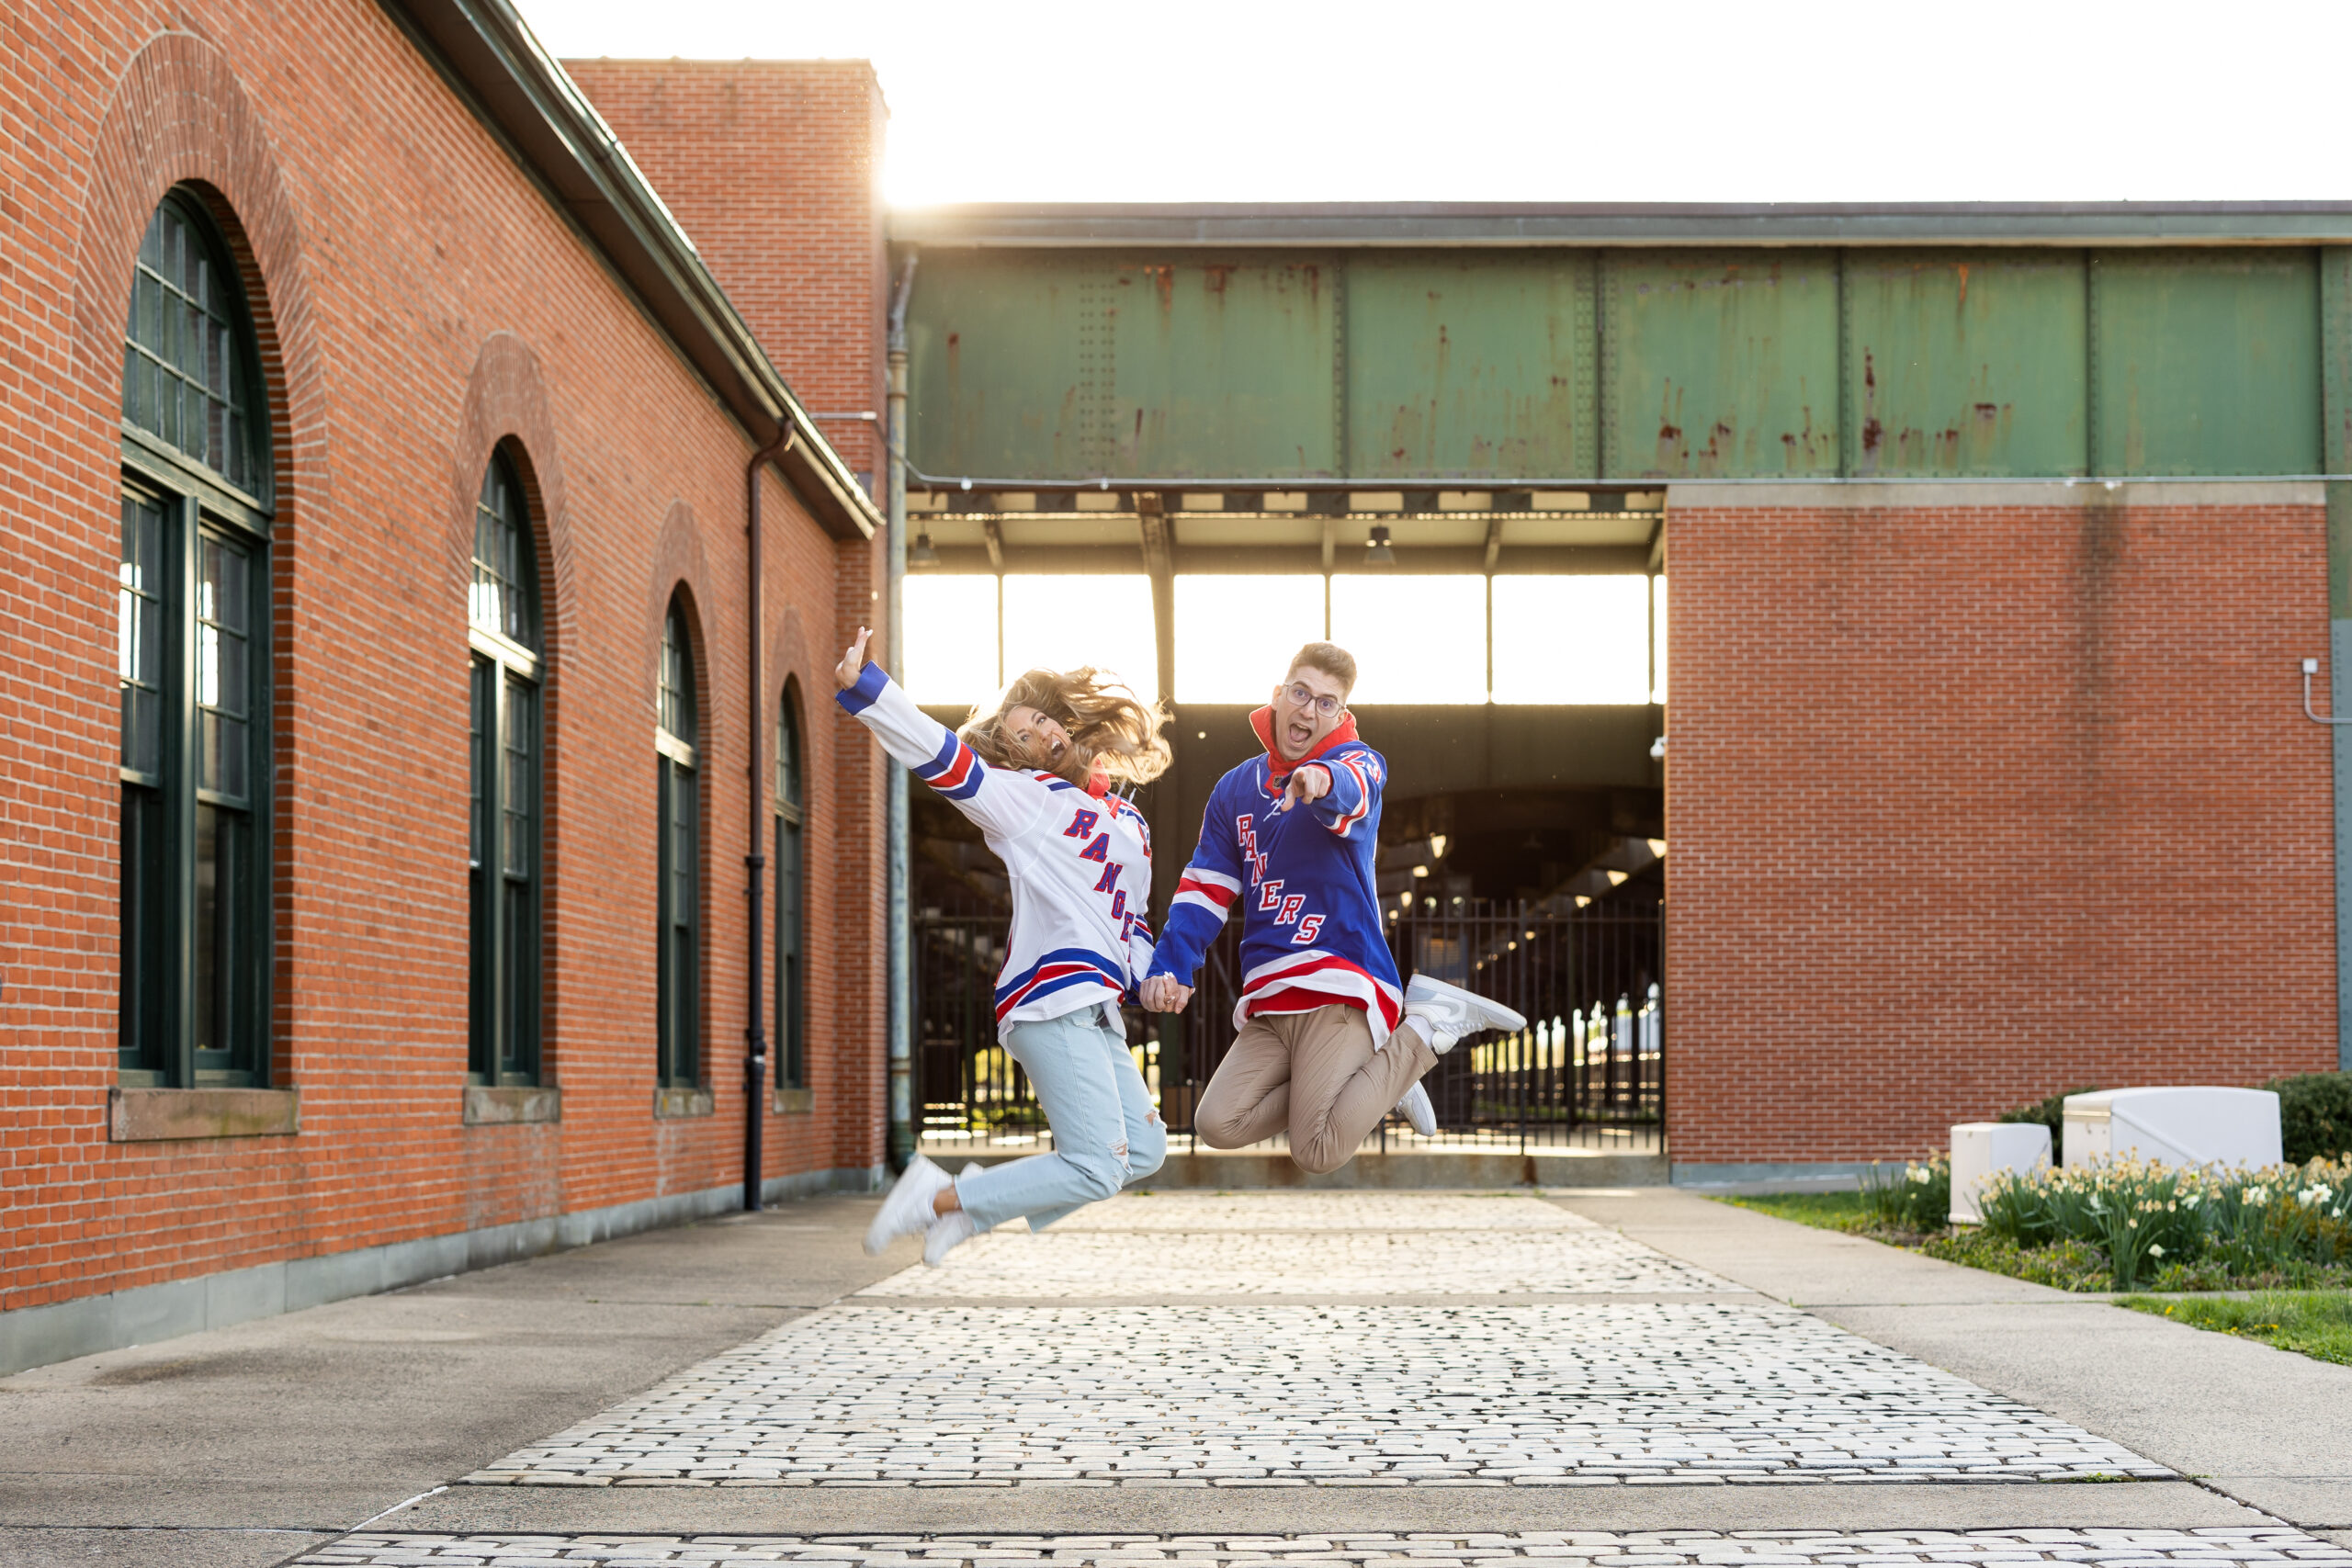 A couple captured by New Jersey Wedding Photographer Jarot Bocanegra, jumping in the air in front of a brick building.